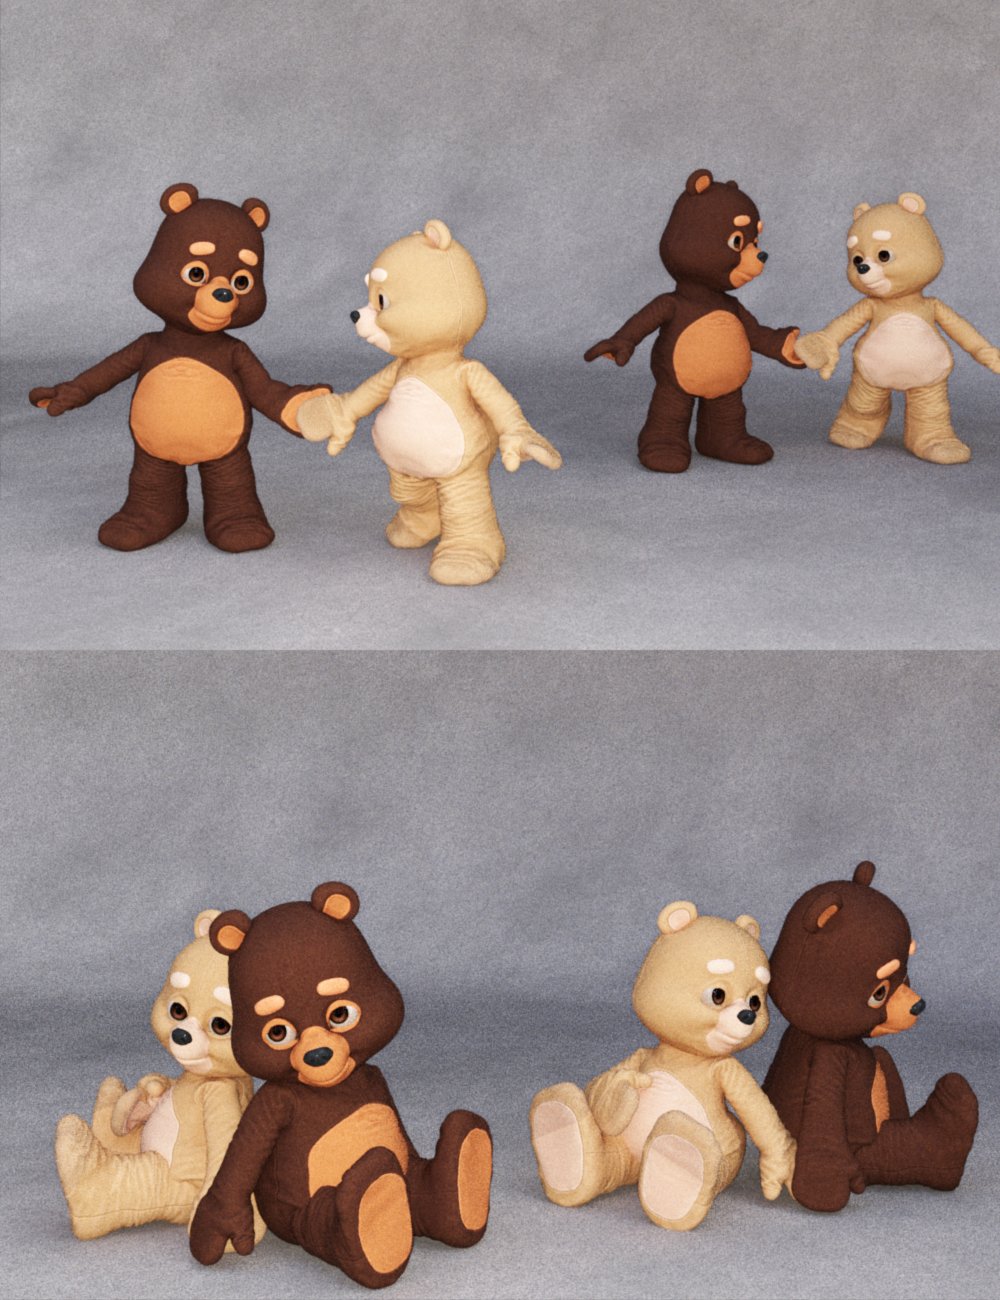 Teddy Care Extra Textures, Poses, and Prop for Teddy by: Muscleman, 3D Models by Daz 3D